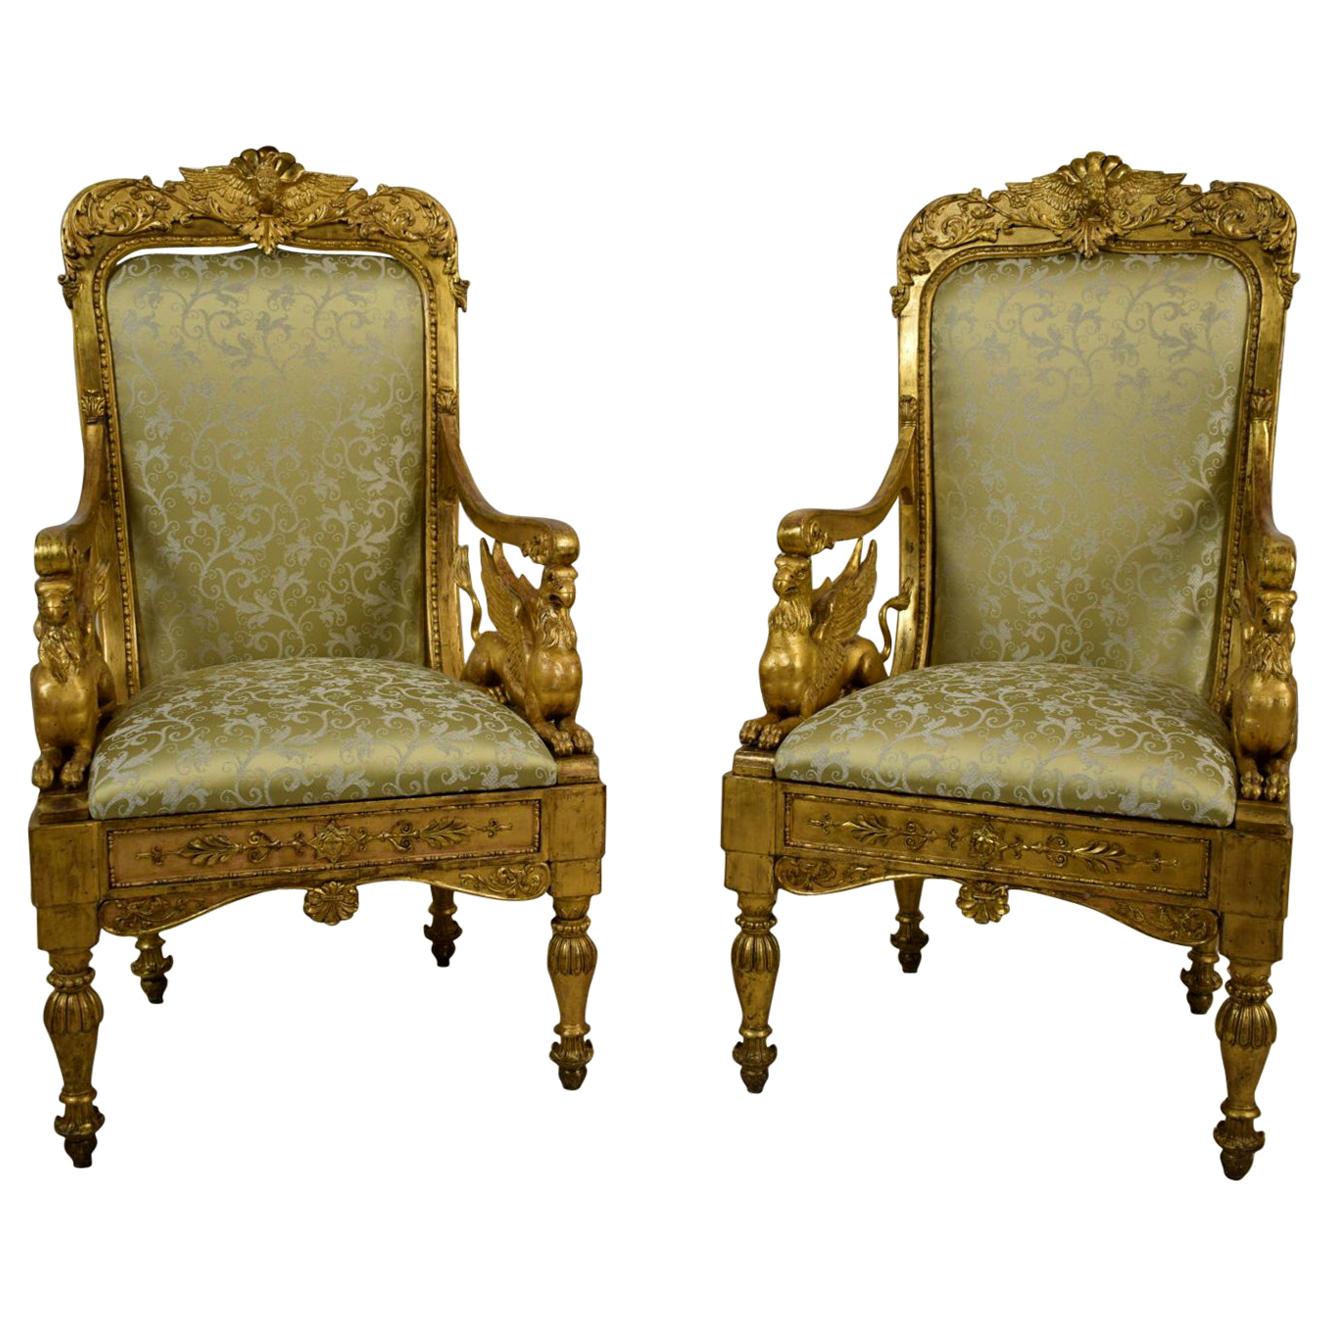 18th century, pair of Italian neoclassical carved giltwood armchairs

This fine pair of armchairs was made in Italy in the neoclassical period, between the end of the 18th and the beginning of the 19th century.
The armchairs have a carve and